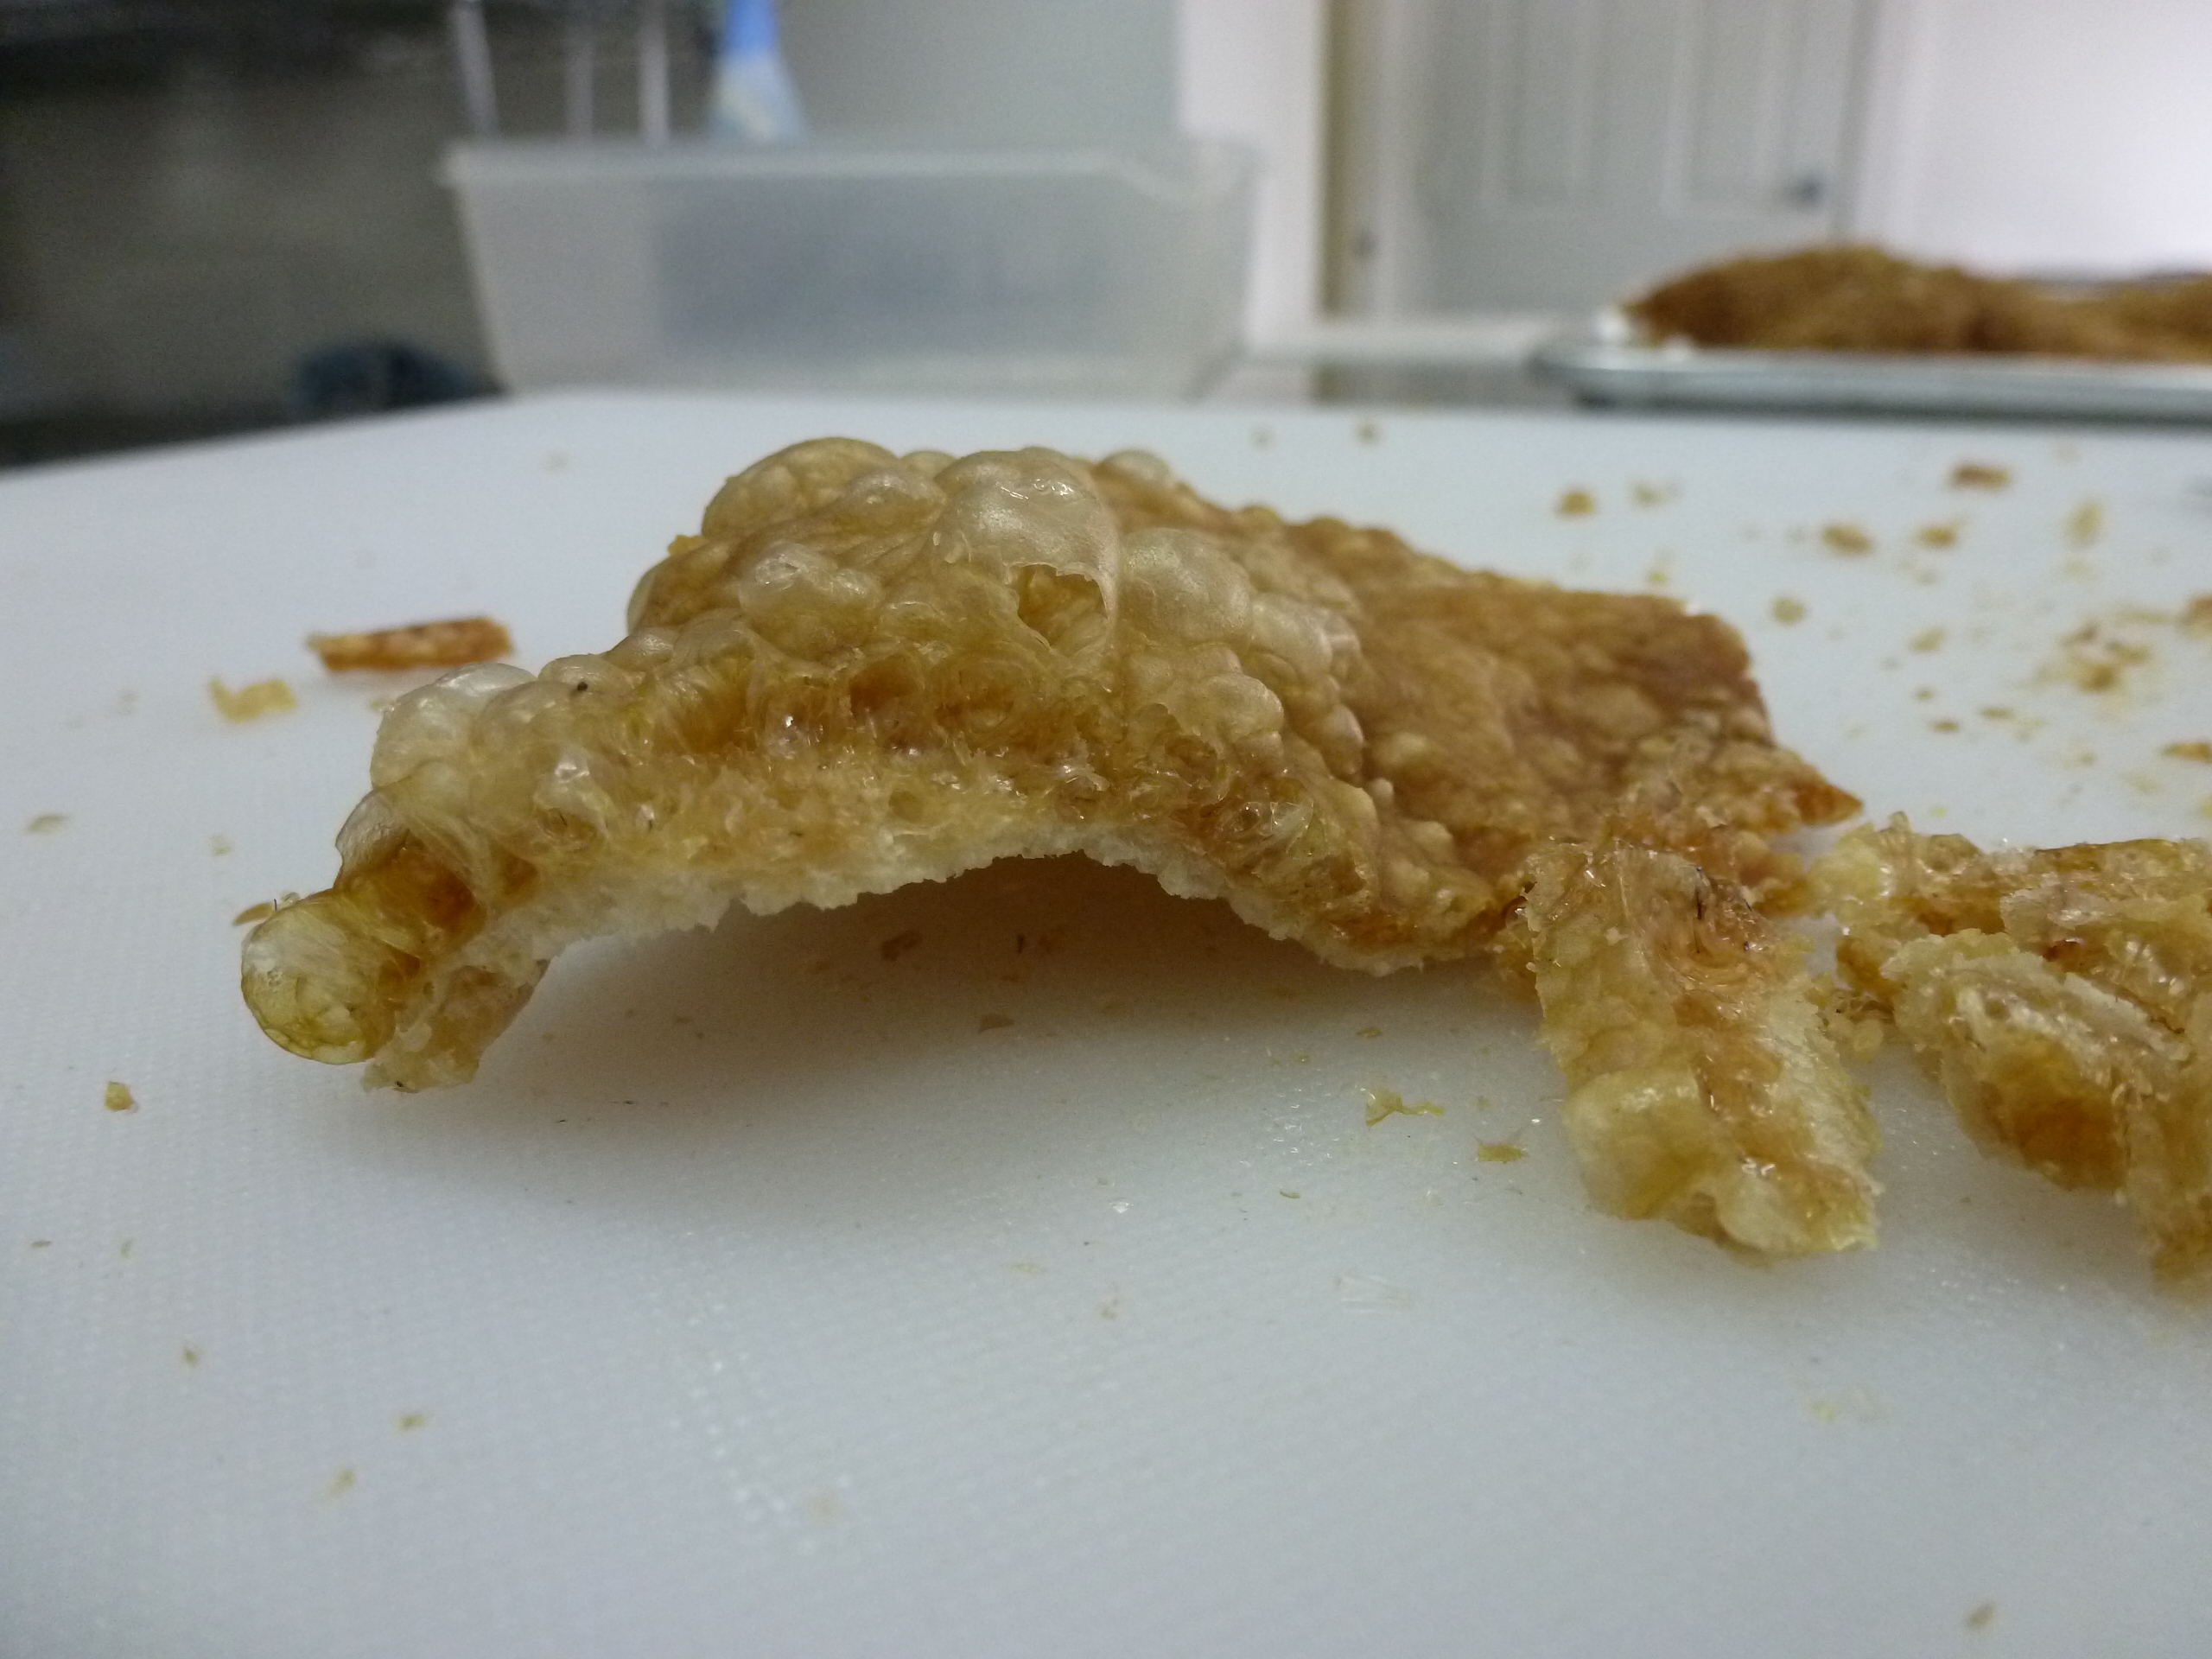 A close-up of the crispy pockets that form in the skin